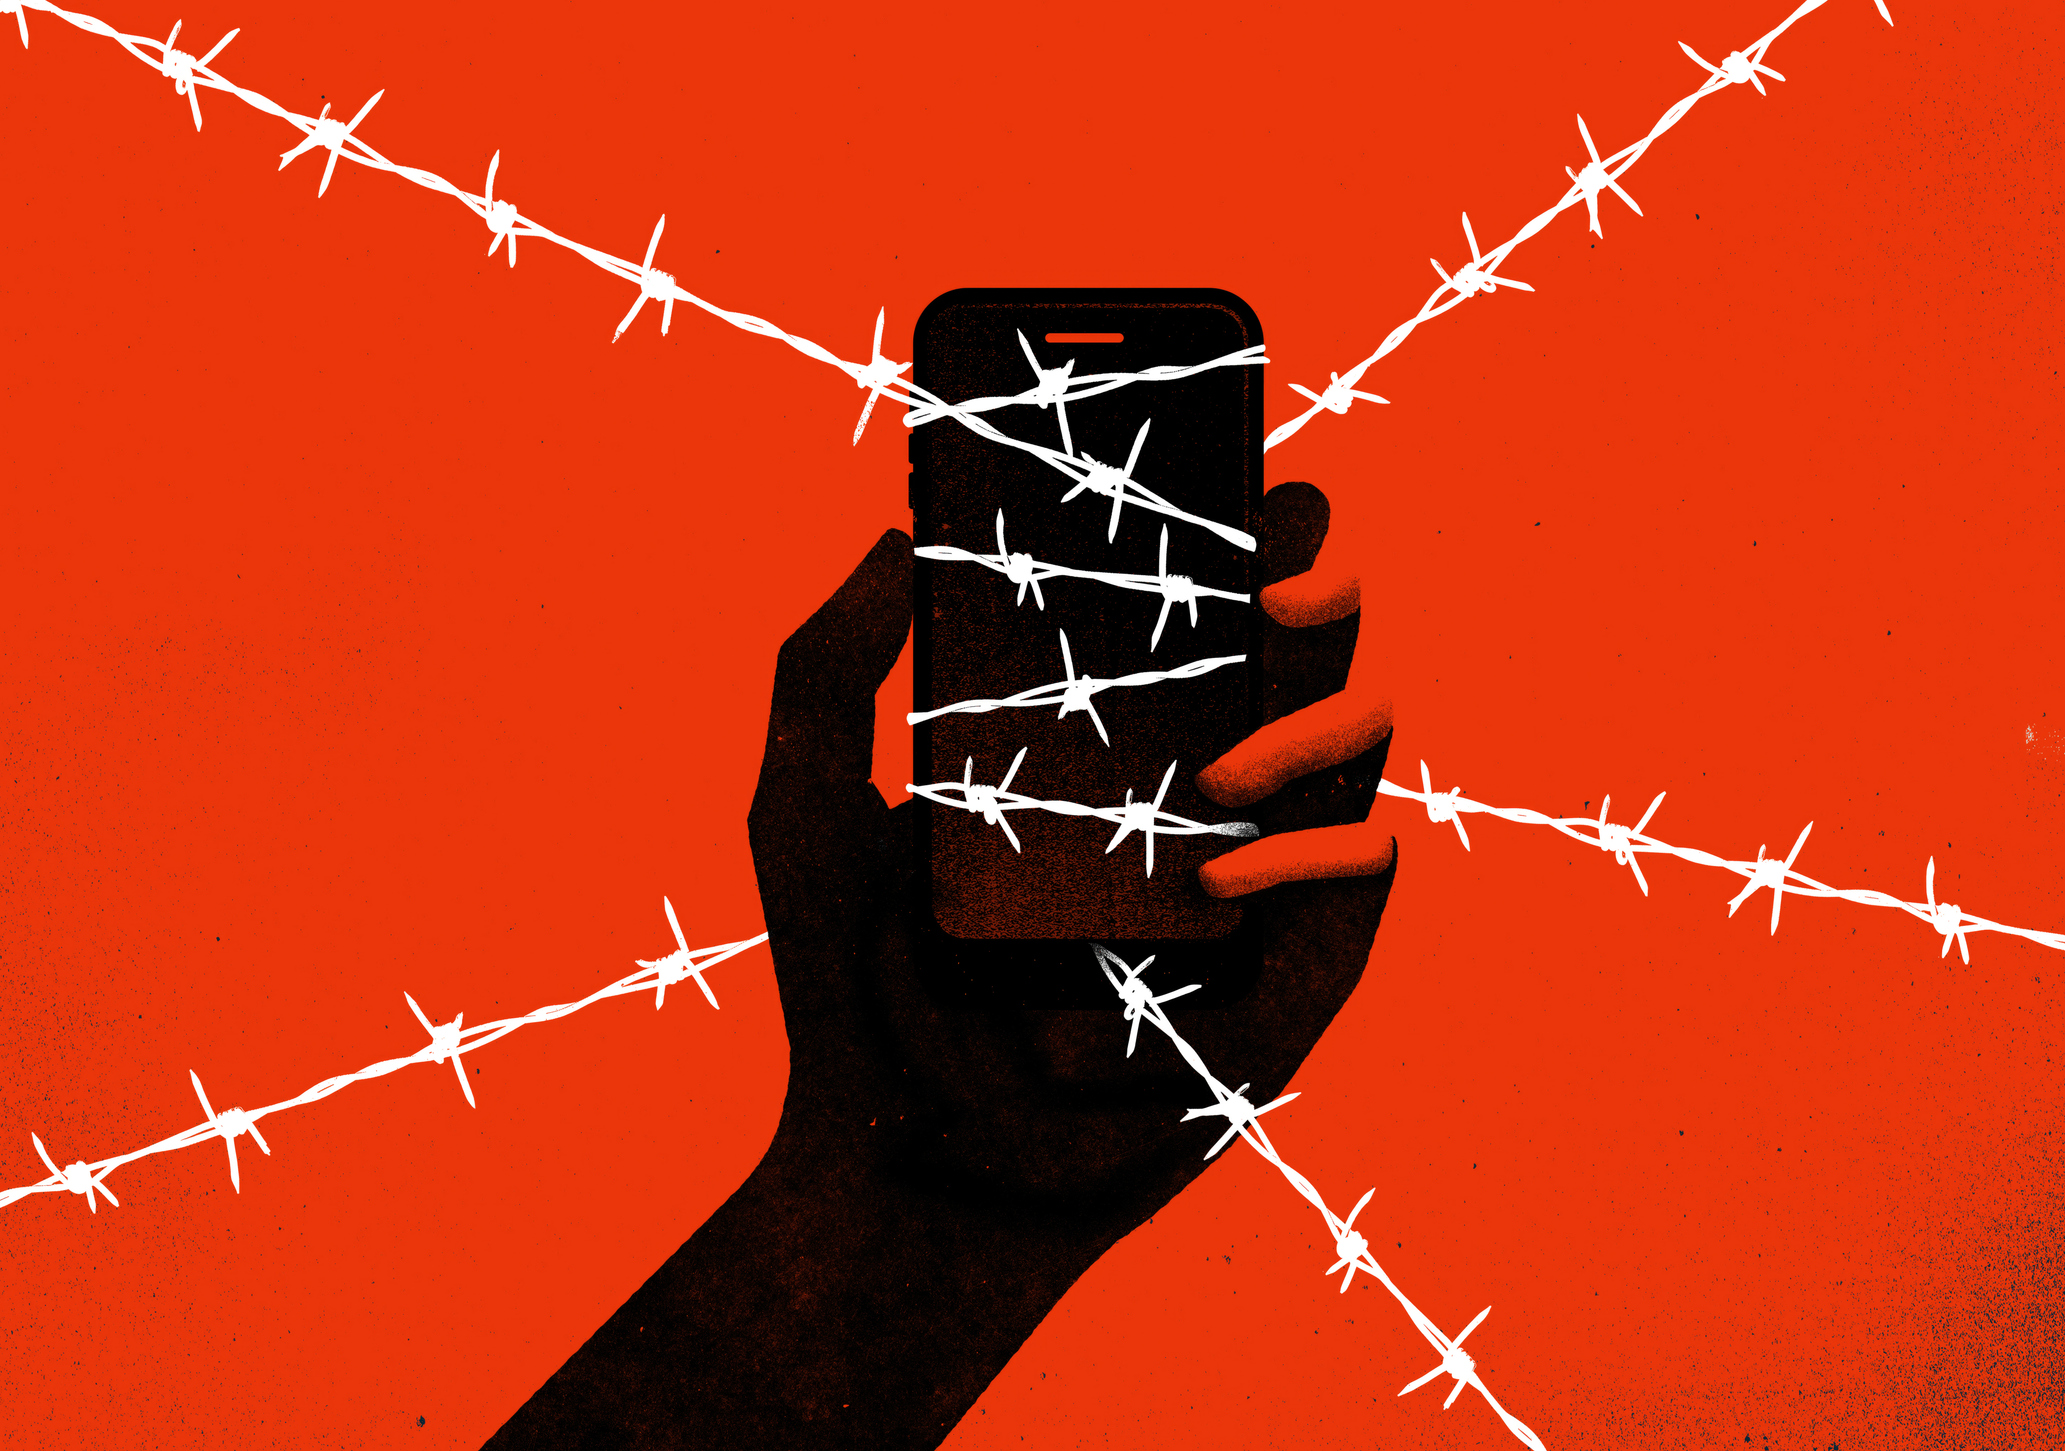 Illustration of a silhouette of a hand holding a smartphone, both entwined in barbed wire